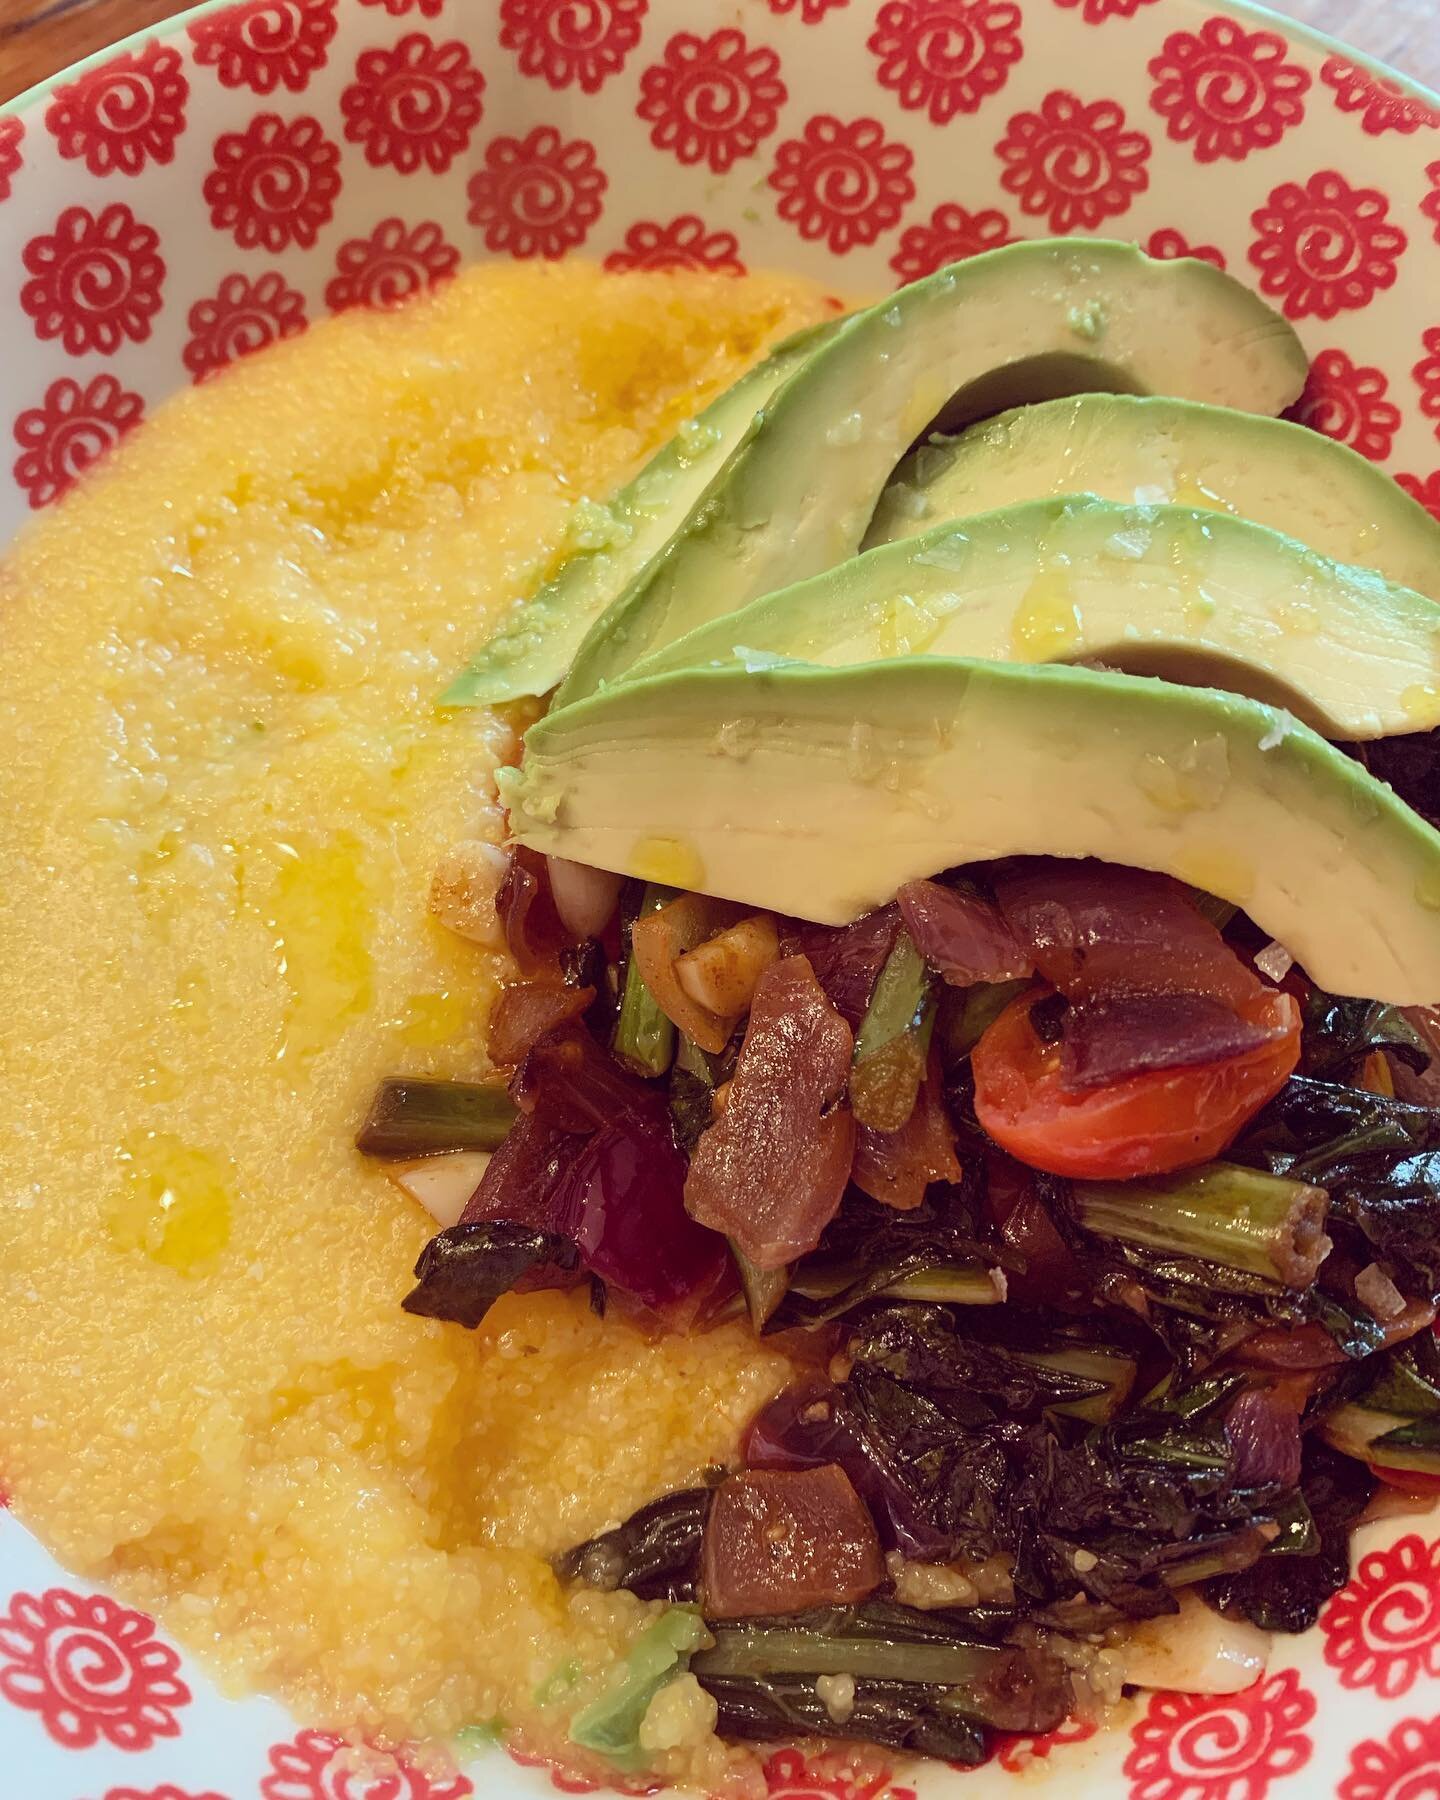 If I ever get the notion to open a restaurant, I&rsquo;d call it The Grits Keep Comin&rsquo; because it would be just like that. Yellow corn grits topped with red onion, kale, garlic, grape tomatoes, Old Bay, avocado, Coratina extra virgin olive oil,